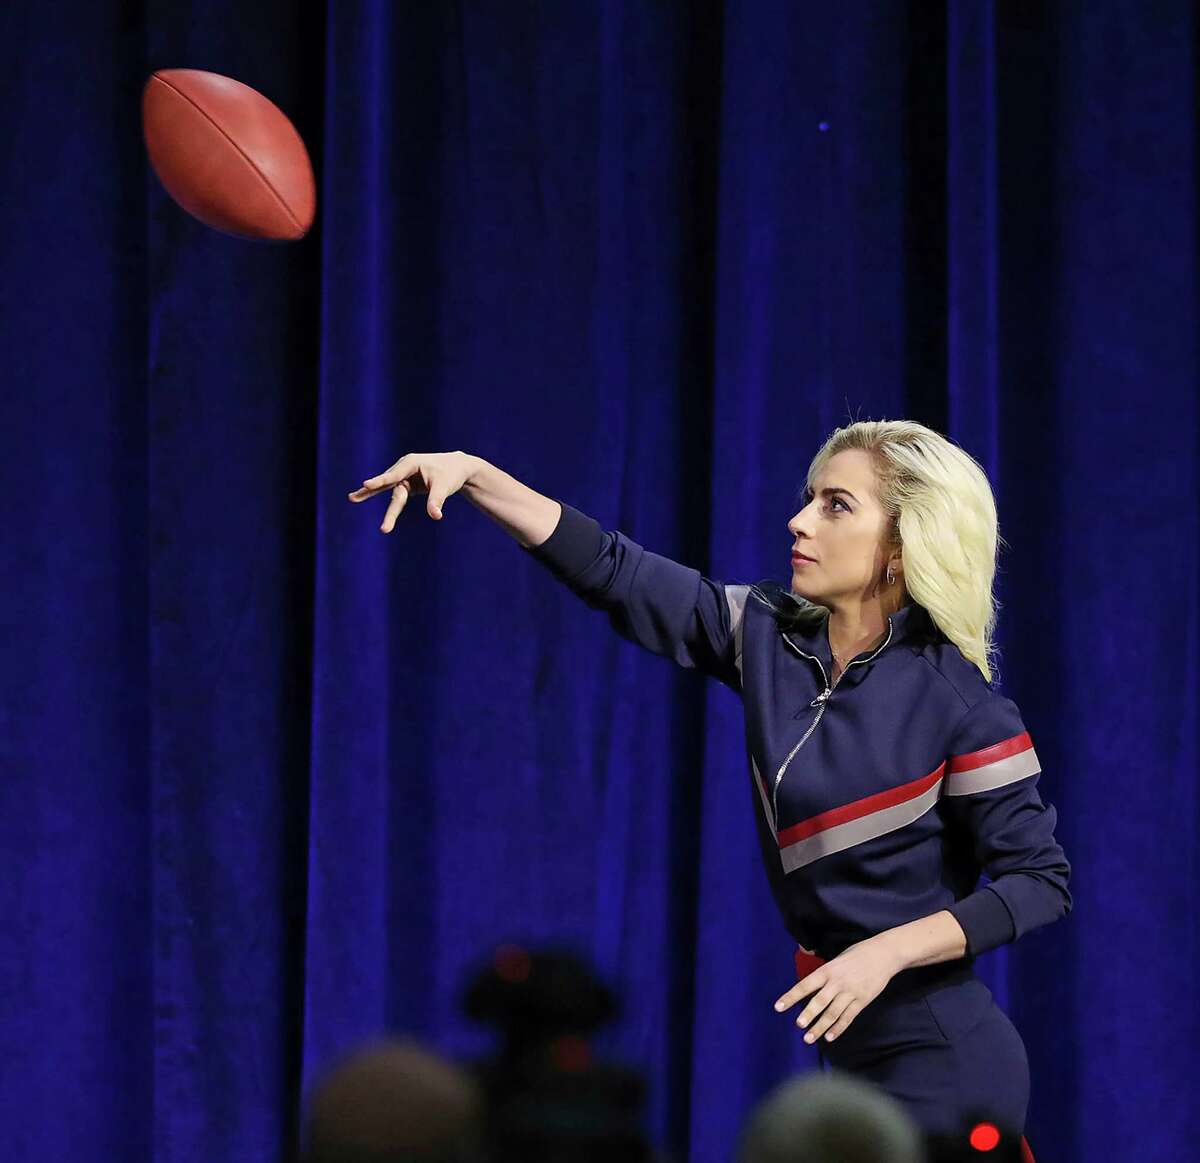 Lady Gaga throws her official game ball into the crowd Lady during an NFL football news conference about the halftime show for Super Bowl 51, Thursday, Feb. 2, 2017, in Houston. (Curtis Compton/Atlanta Journal-Constitution via AP)